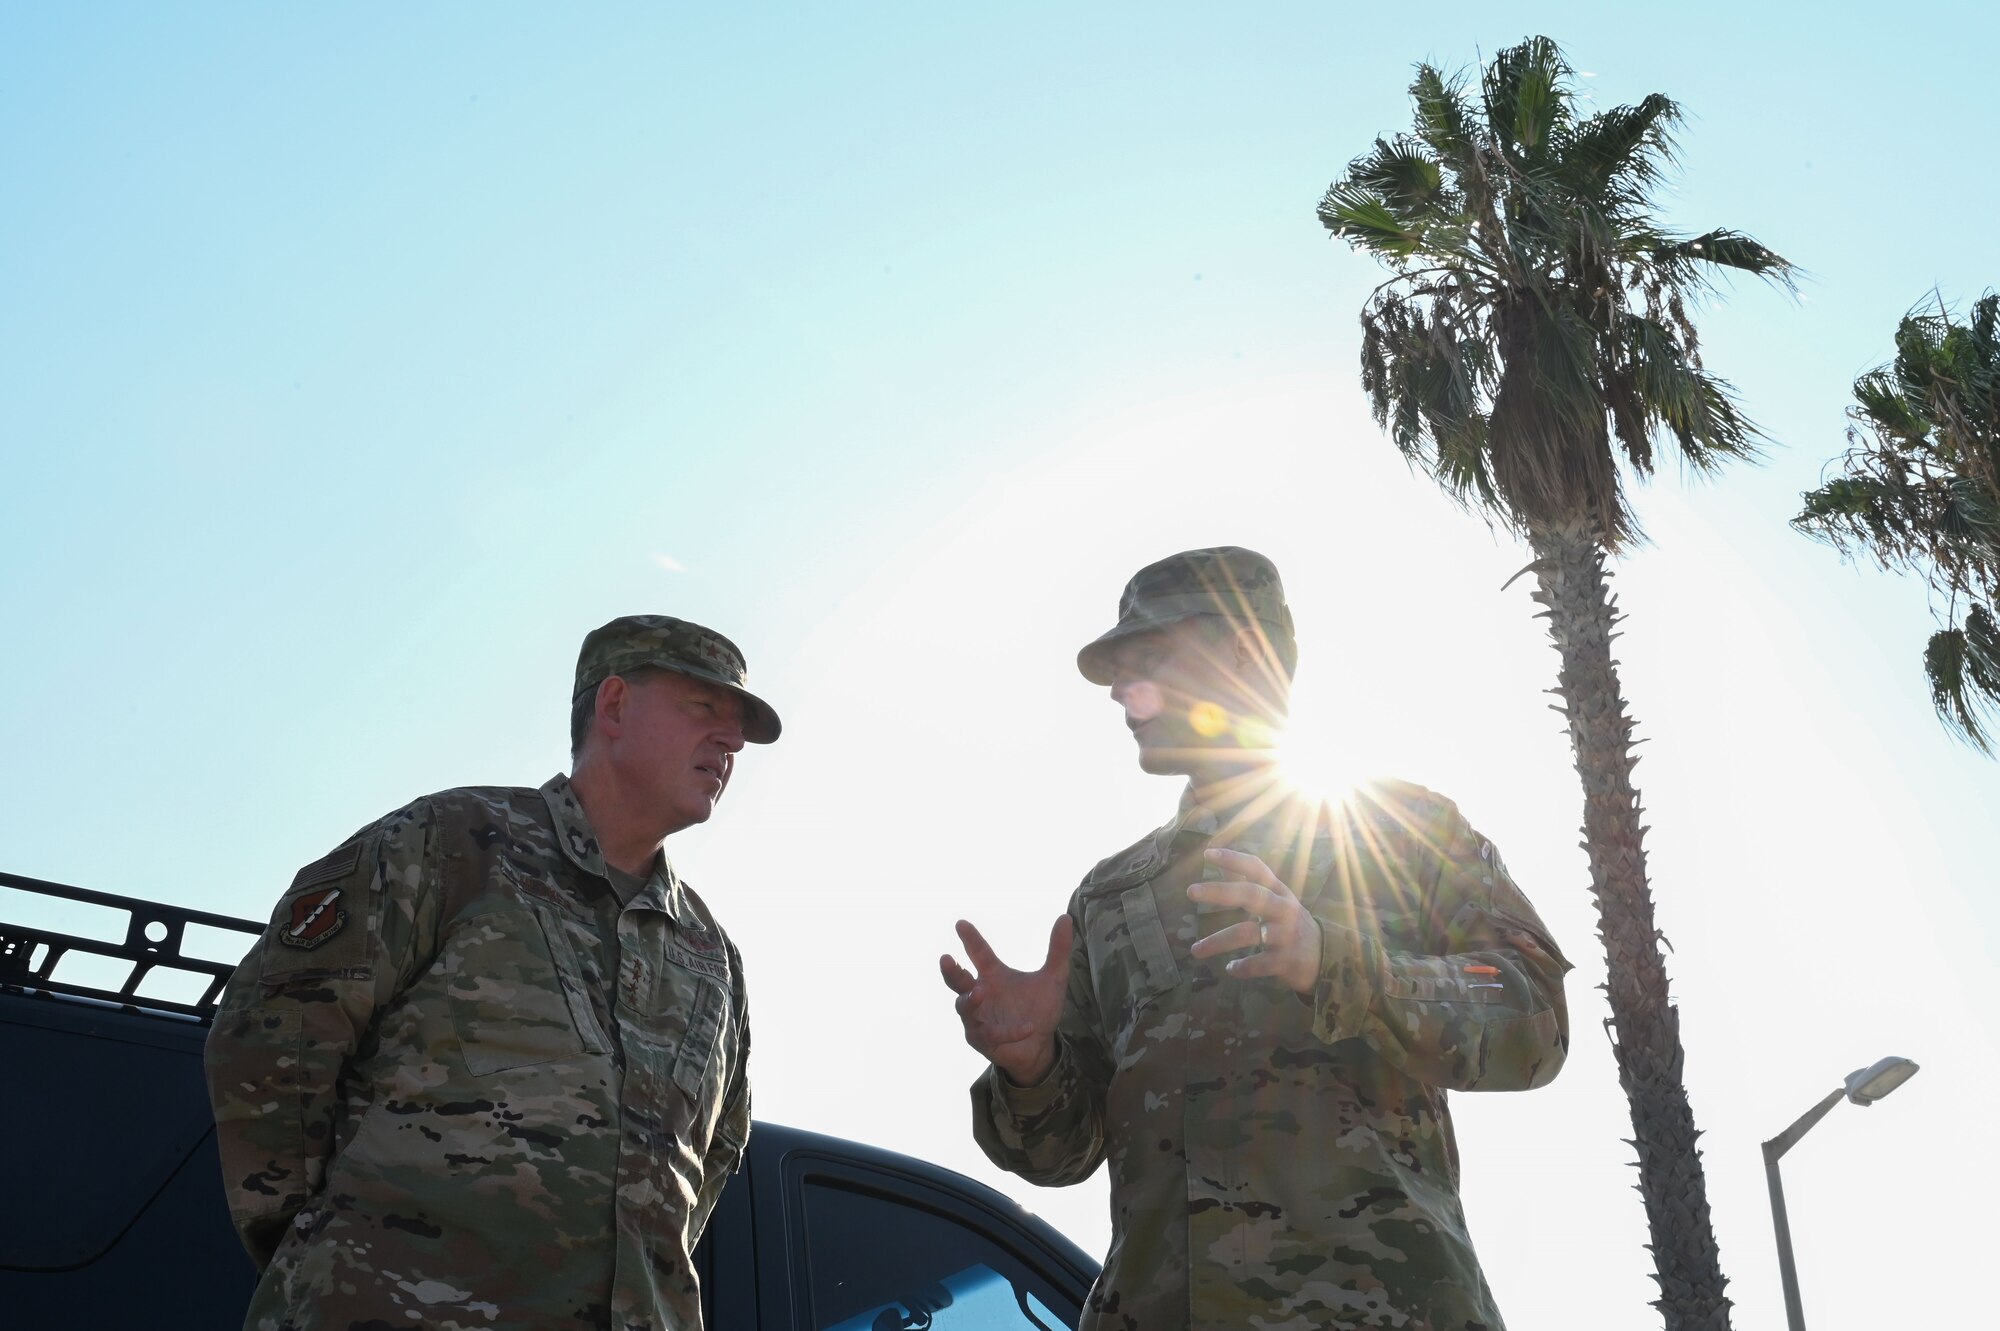 Gen. James B. Hecker, left, U.S. Air Forces in Europe and Air Forces Africa commander, speaks with Col. Scott Carbaugh, 39th Medical Group commander, during his visit to Incirlik Air Base, Turkey, Aug. 4, 2022. Hecker met with several Airmen and received briefings about the wing’s mission and capabilities while speaking with members about how their role supports the mission of USAFE-AFAFRICA. The wing takes deliberate actions to develop Airmen and their families; confronts global challenges in support of the National Defense Strategy to defend our country and our allies; and utilizes dedicated efforts to deliver peace to our nation and its allies by fostering stability and deterring aggression throughout Europe and Africa. (U.S. Air Force photo by Staff Sgt. Matthew Angulo)